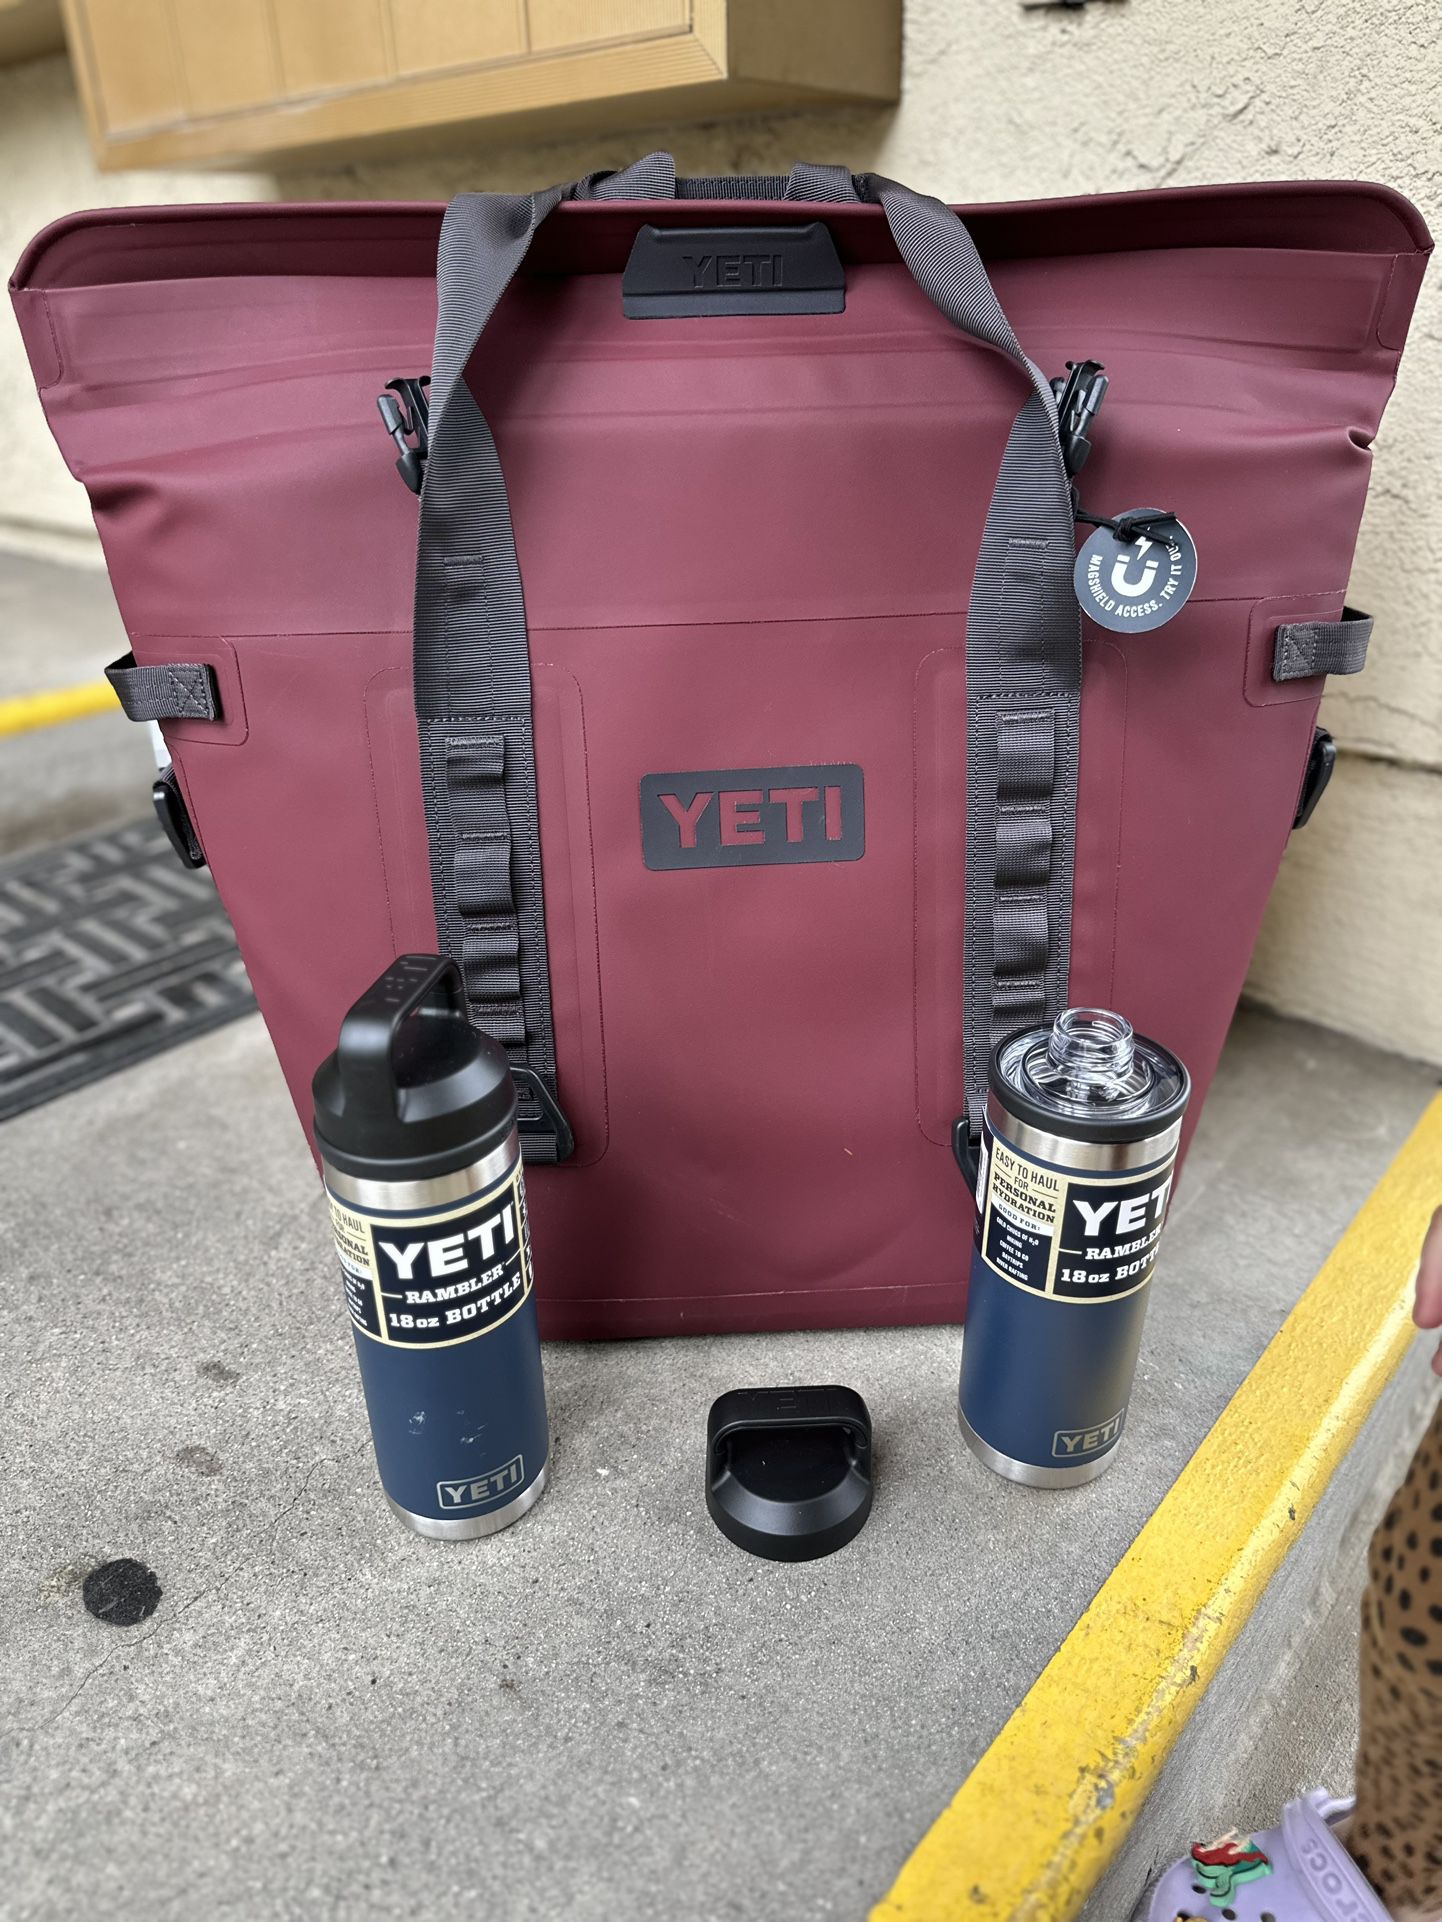 YETI Hopper M30” Soft COOLER.. With a YETI  Cup . 18.oZ” $360